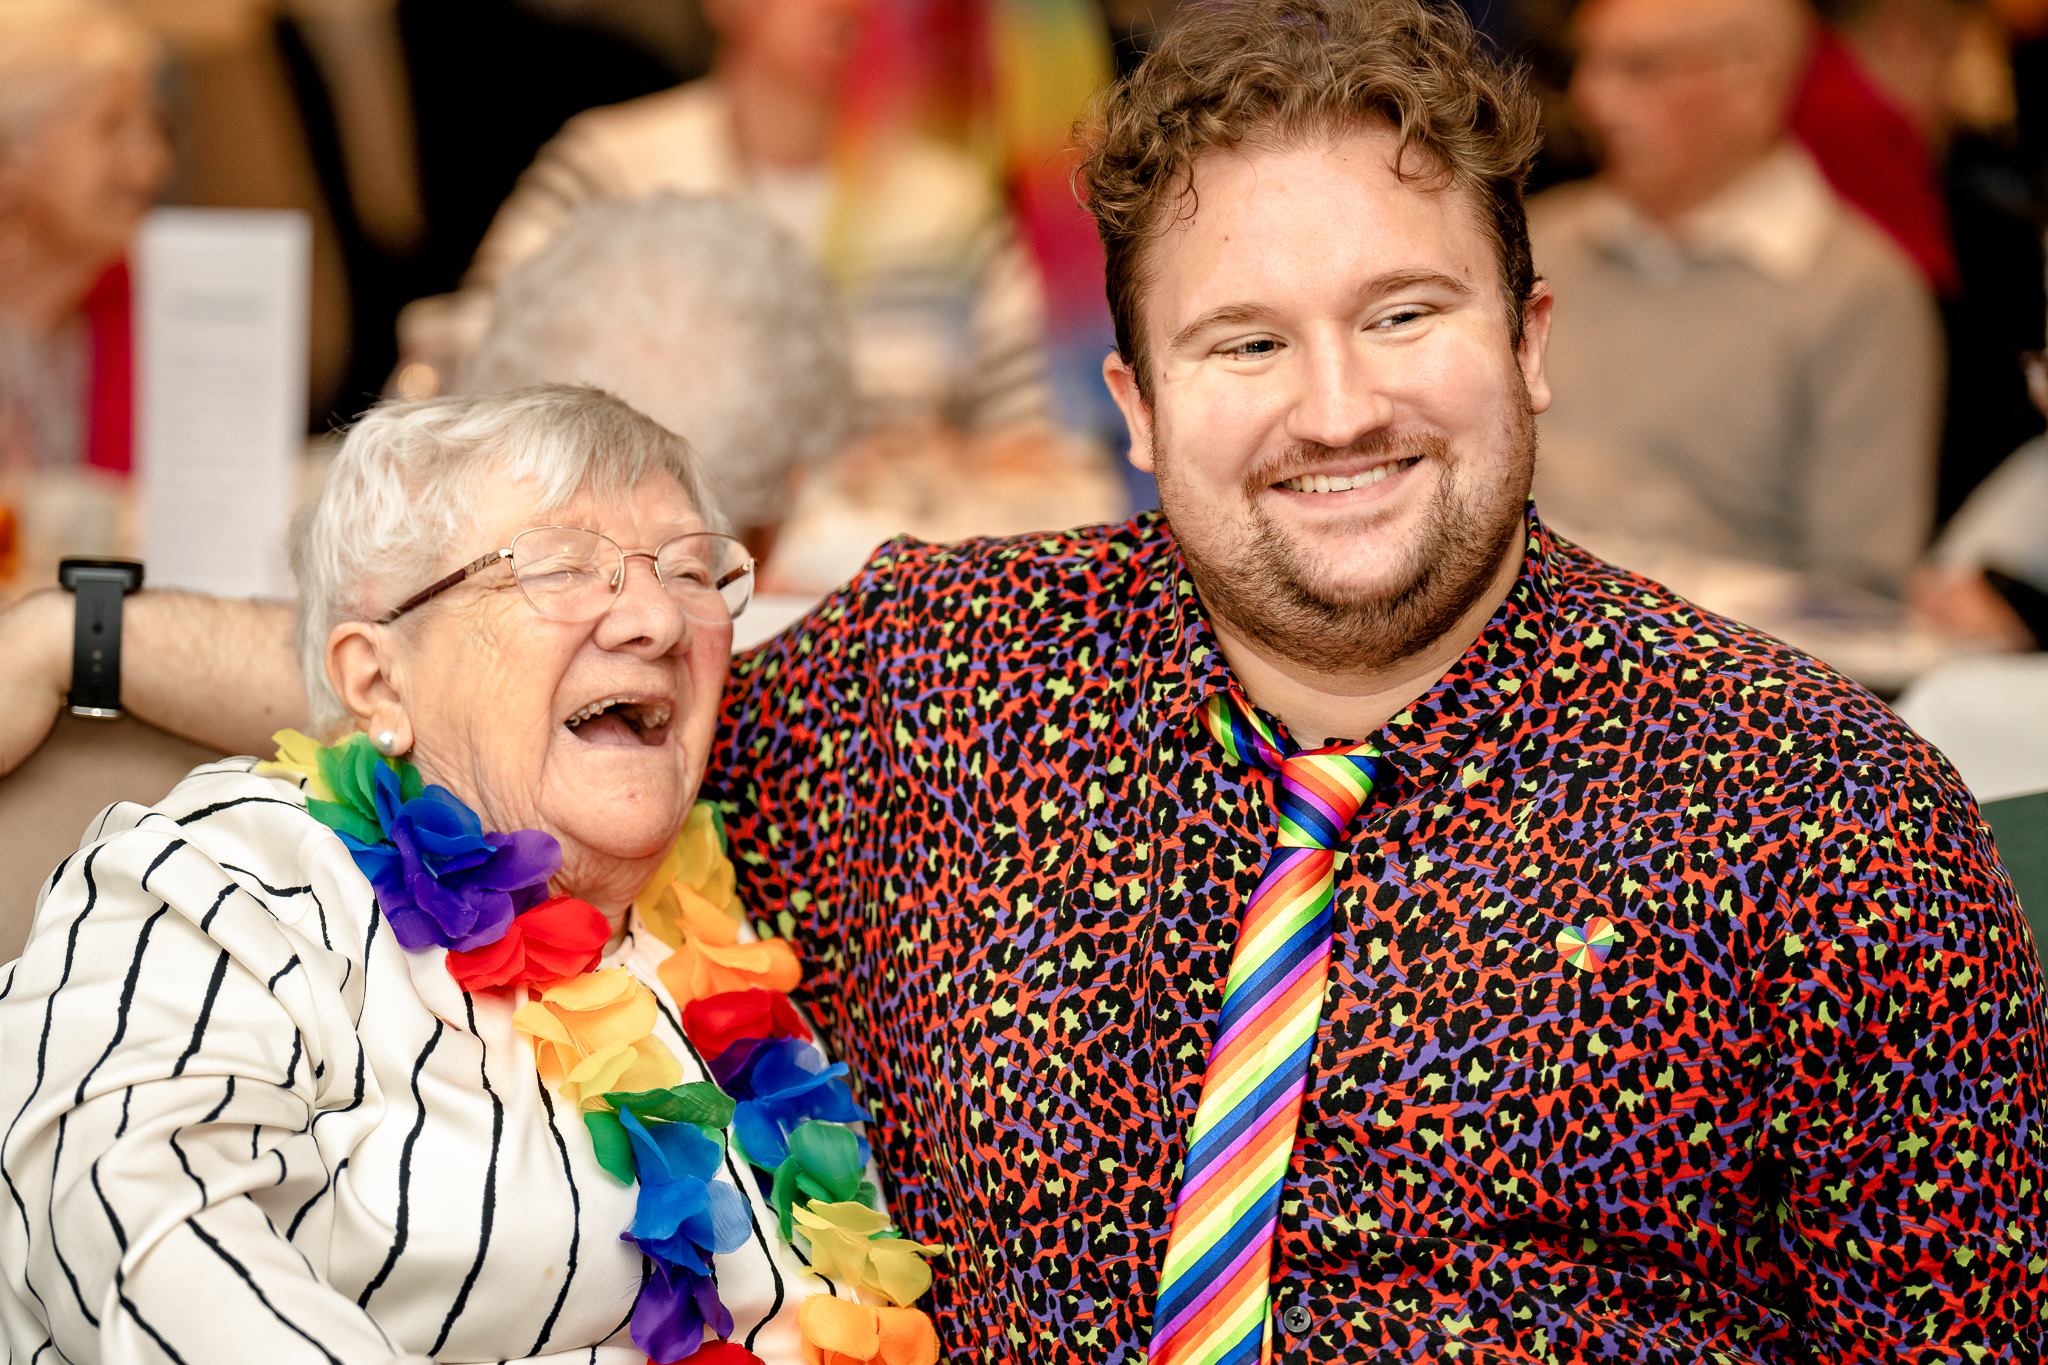 Elderly woman and man laughing together, wearing rainbow coloured accessories